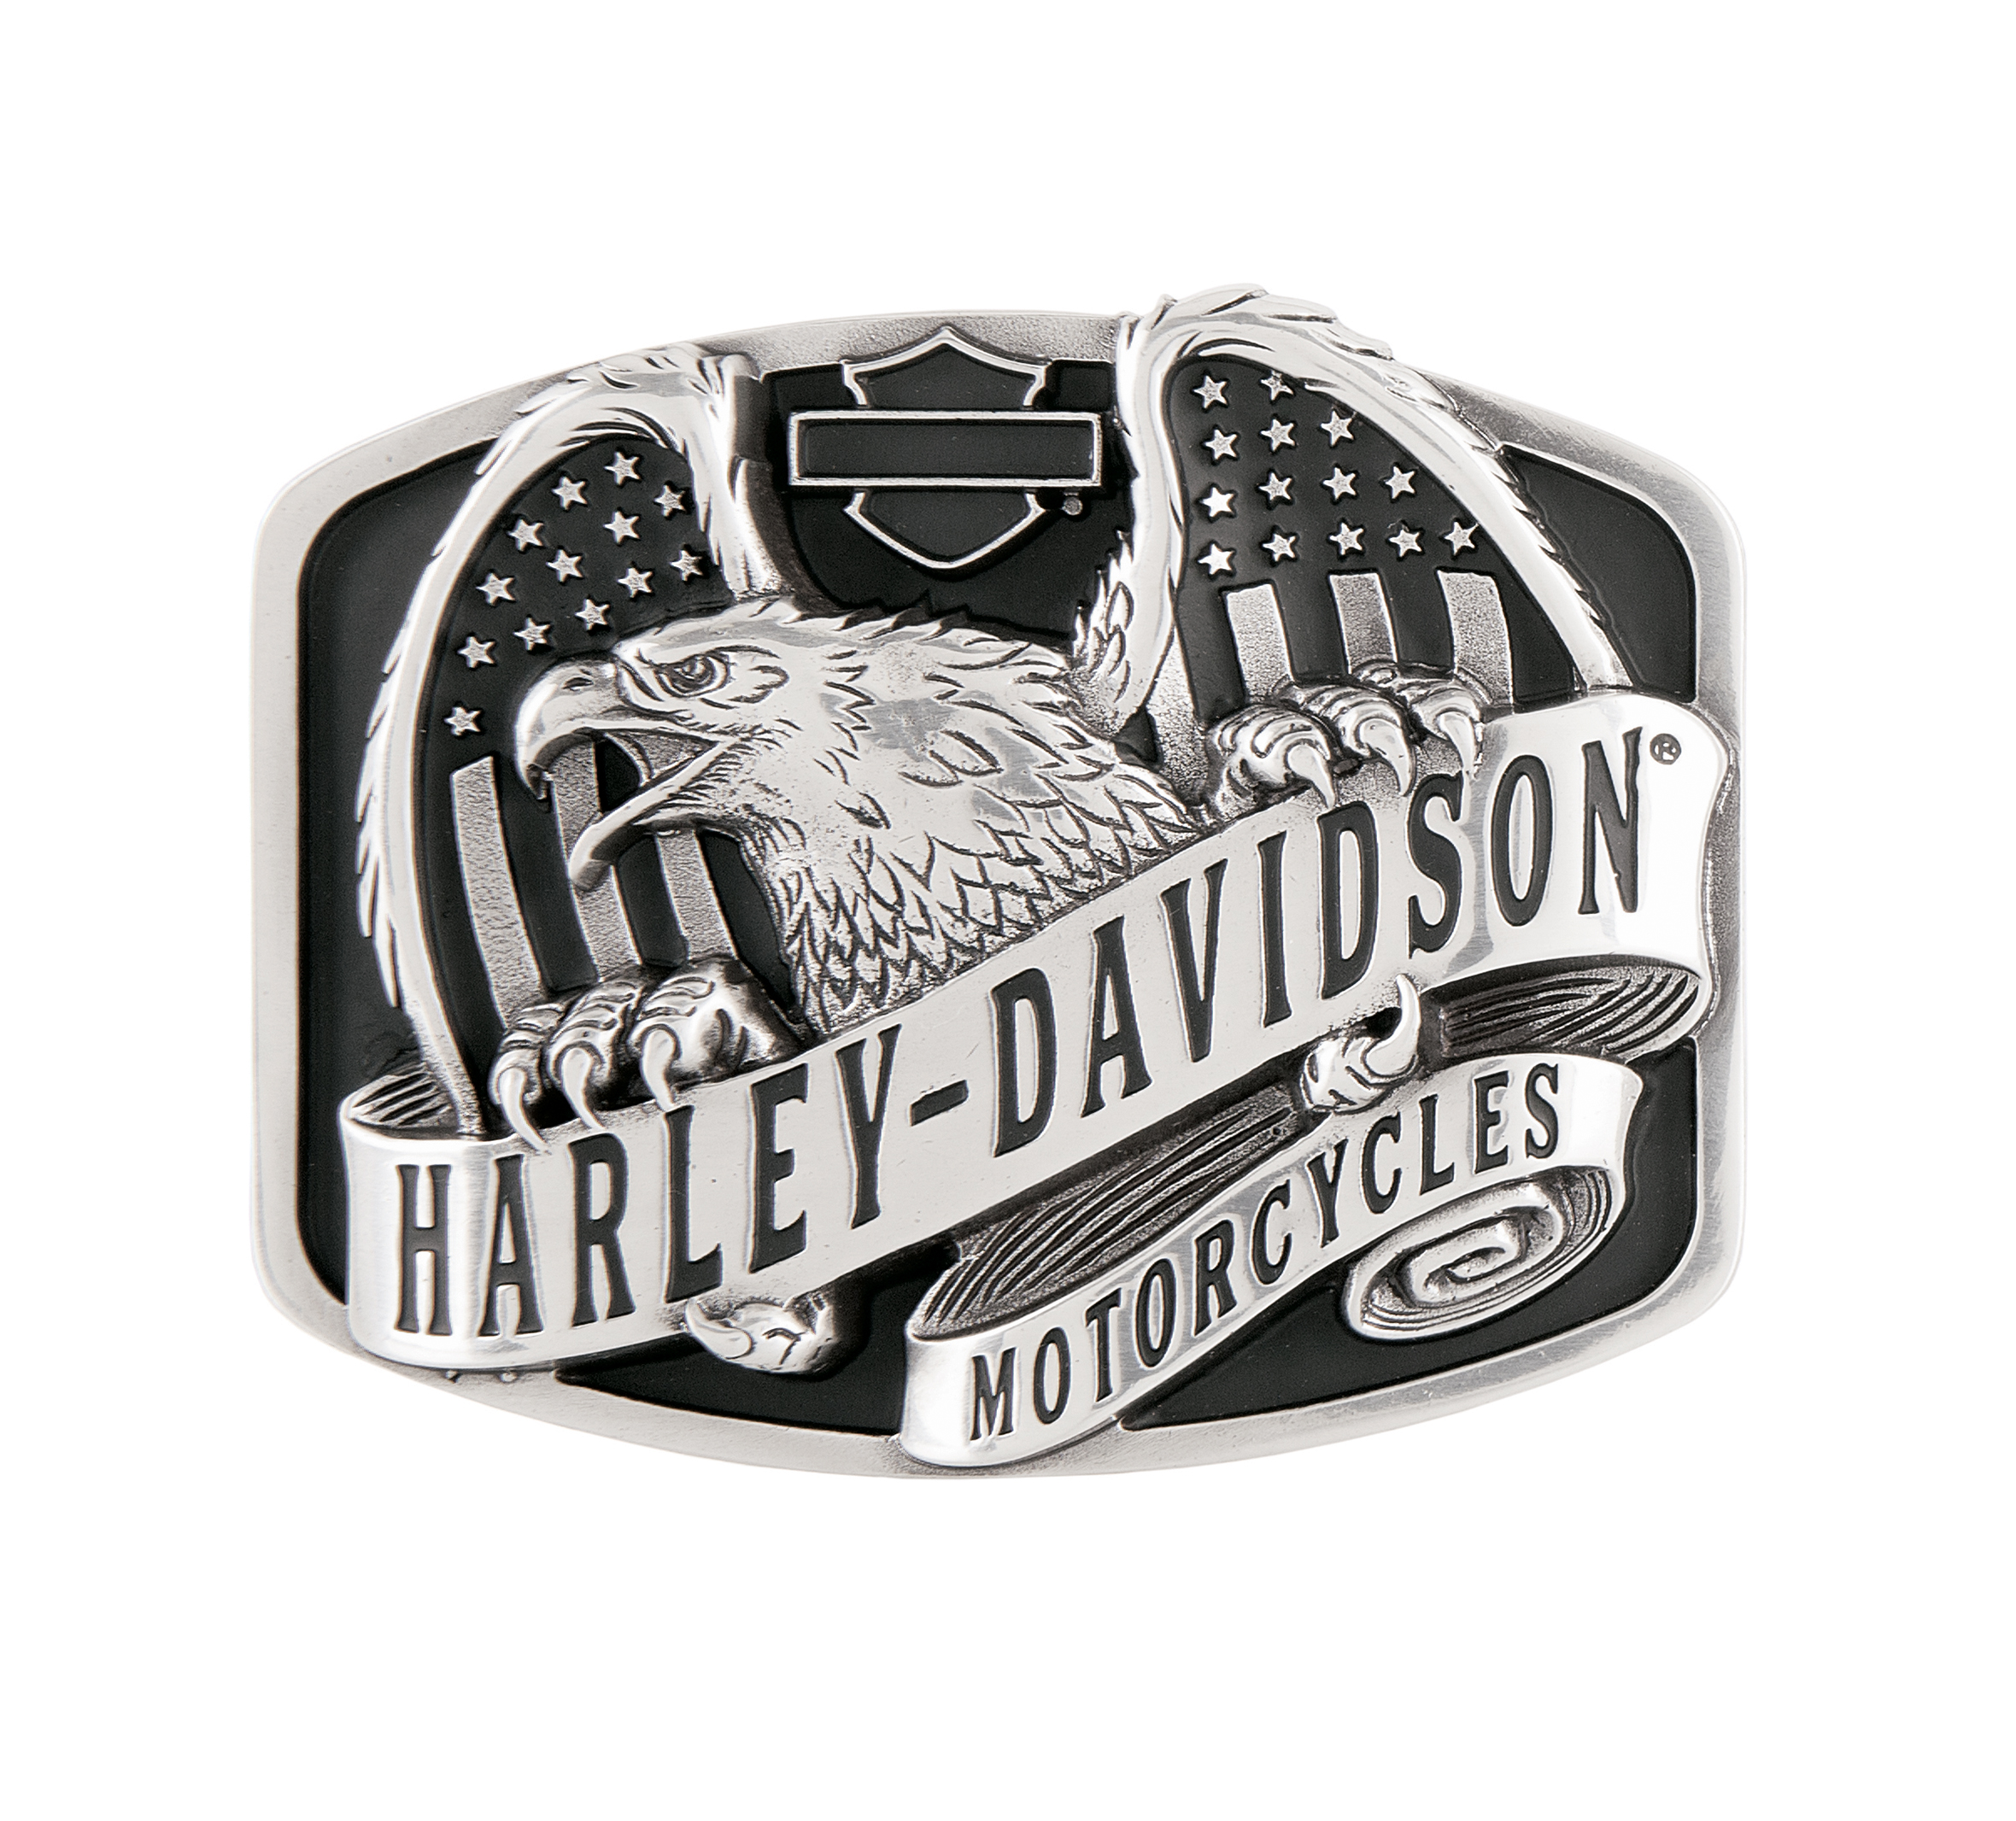 Harley-Davidson Motorcycles Silver Wing Authentic Vintage Patch